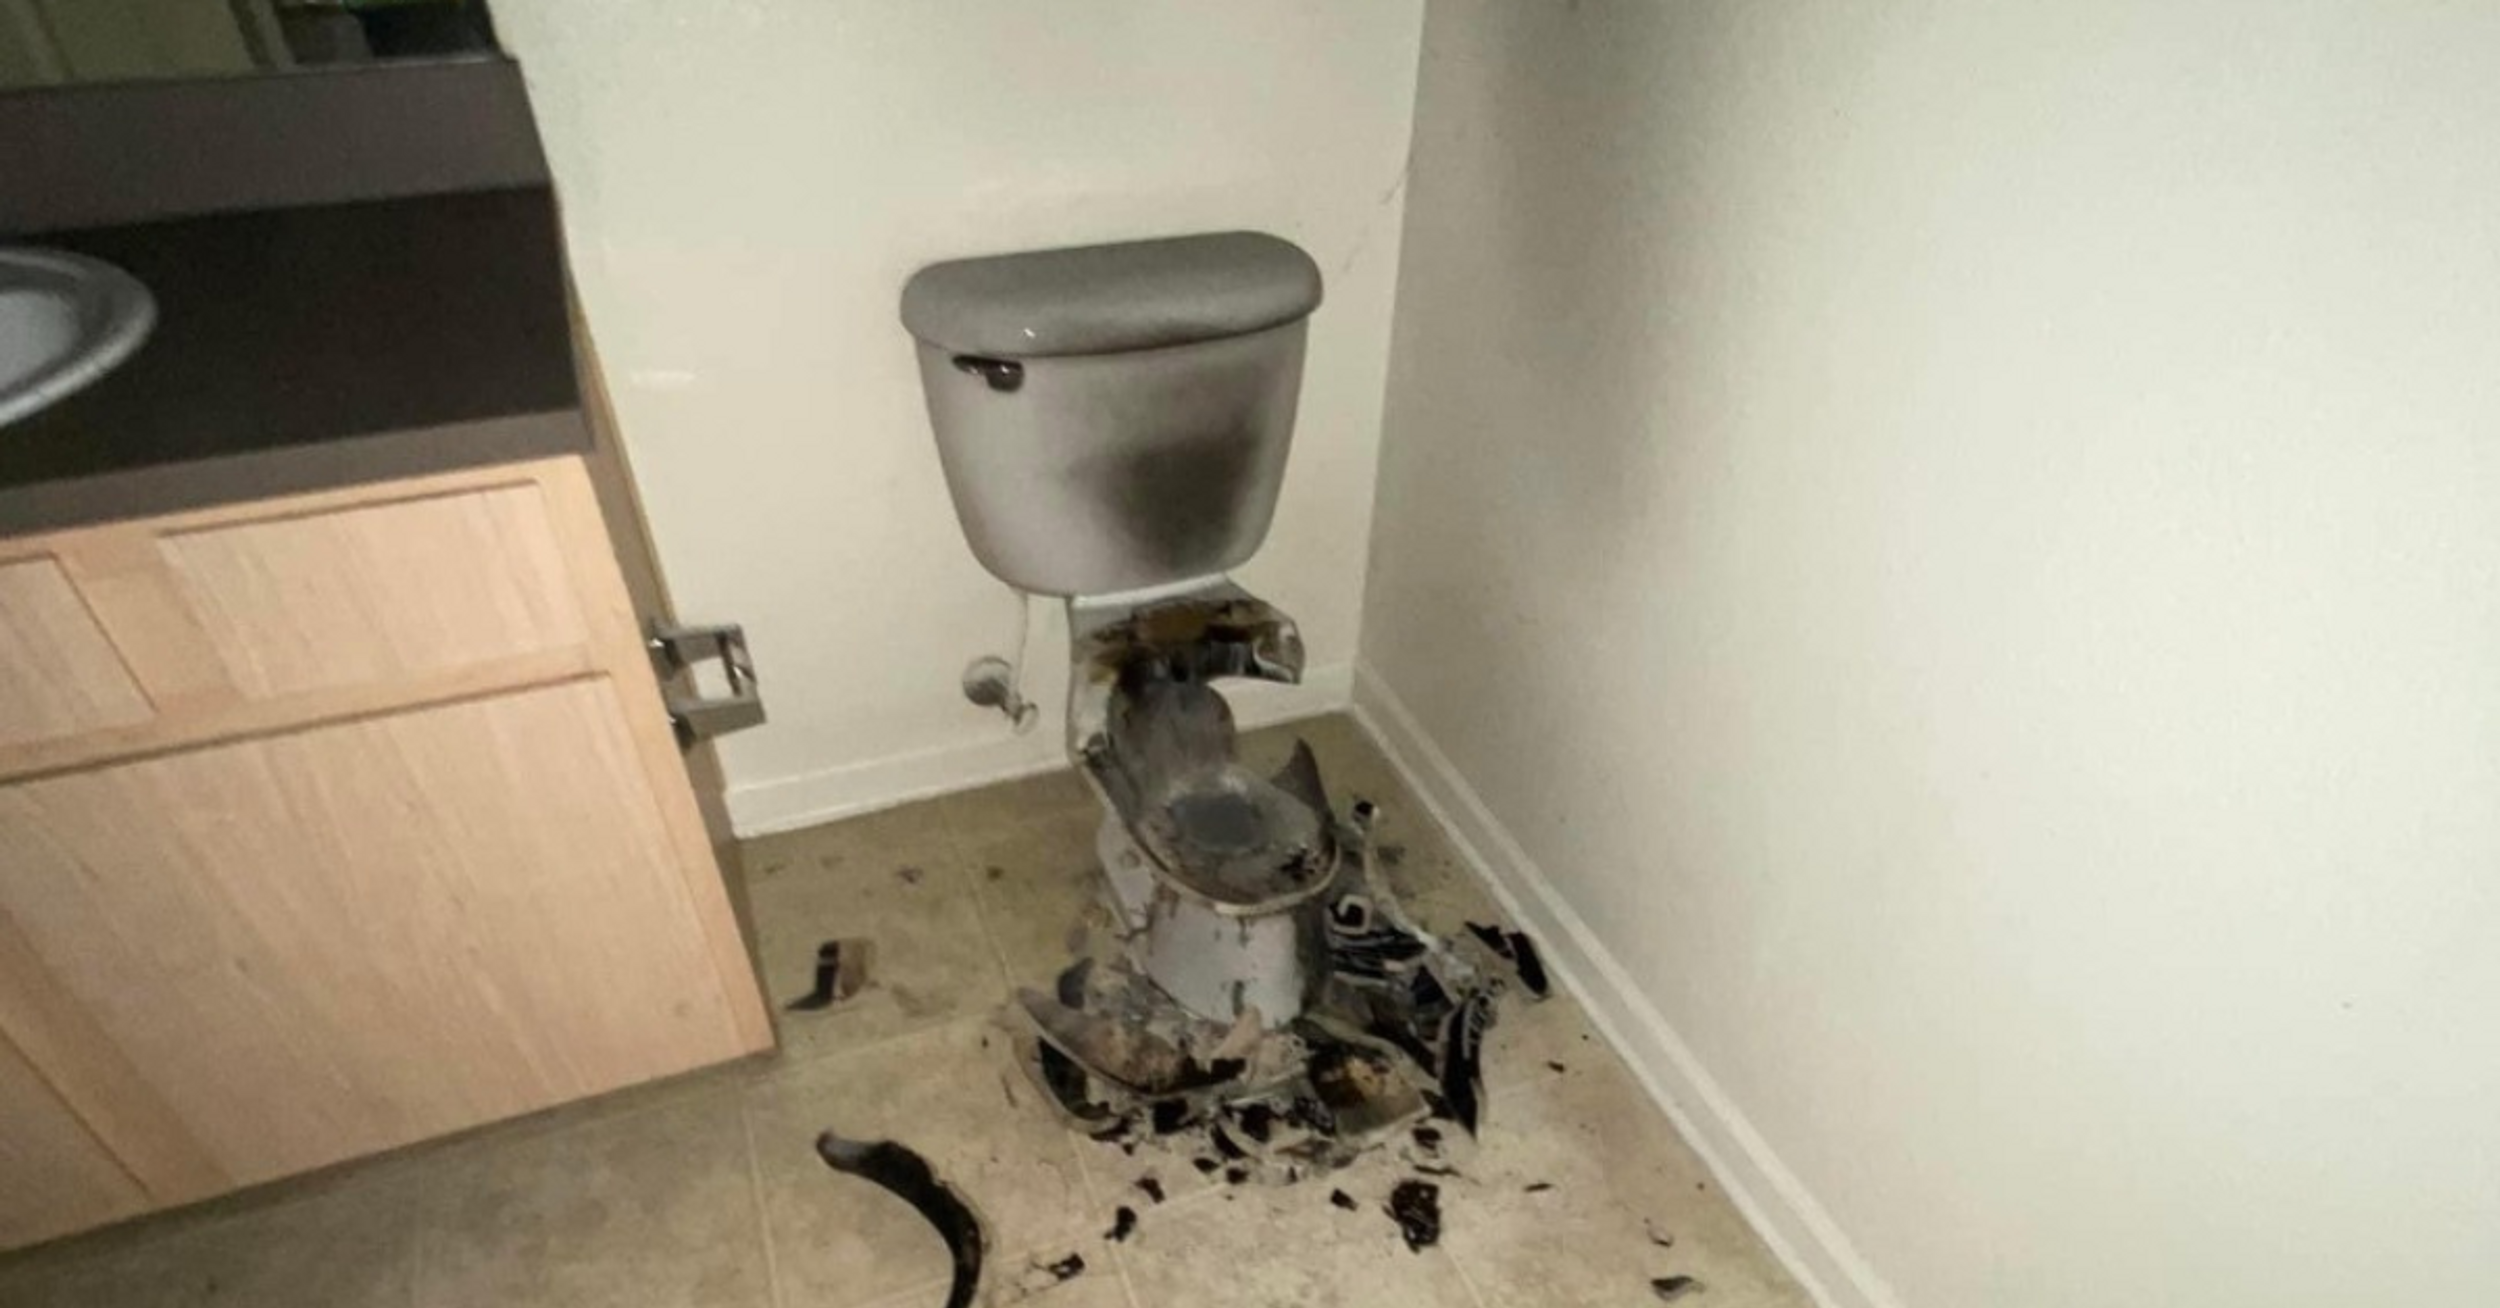 Lightning Strike At Oklahoma Apartment Complex Completely Shatters Toilet—And Here Come The Jokes